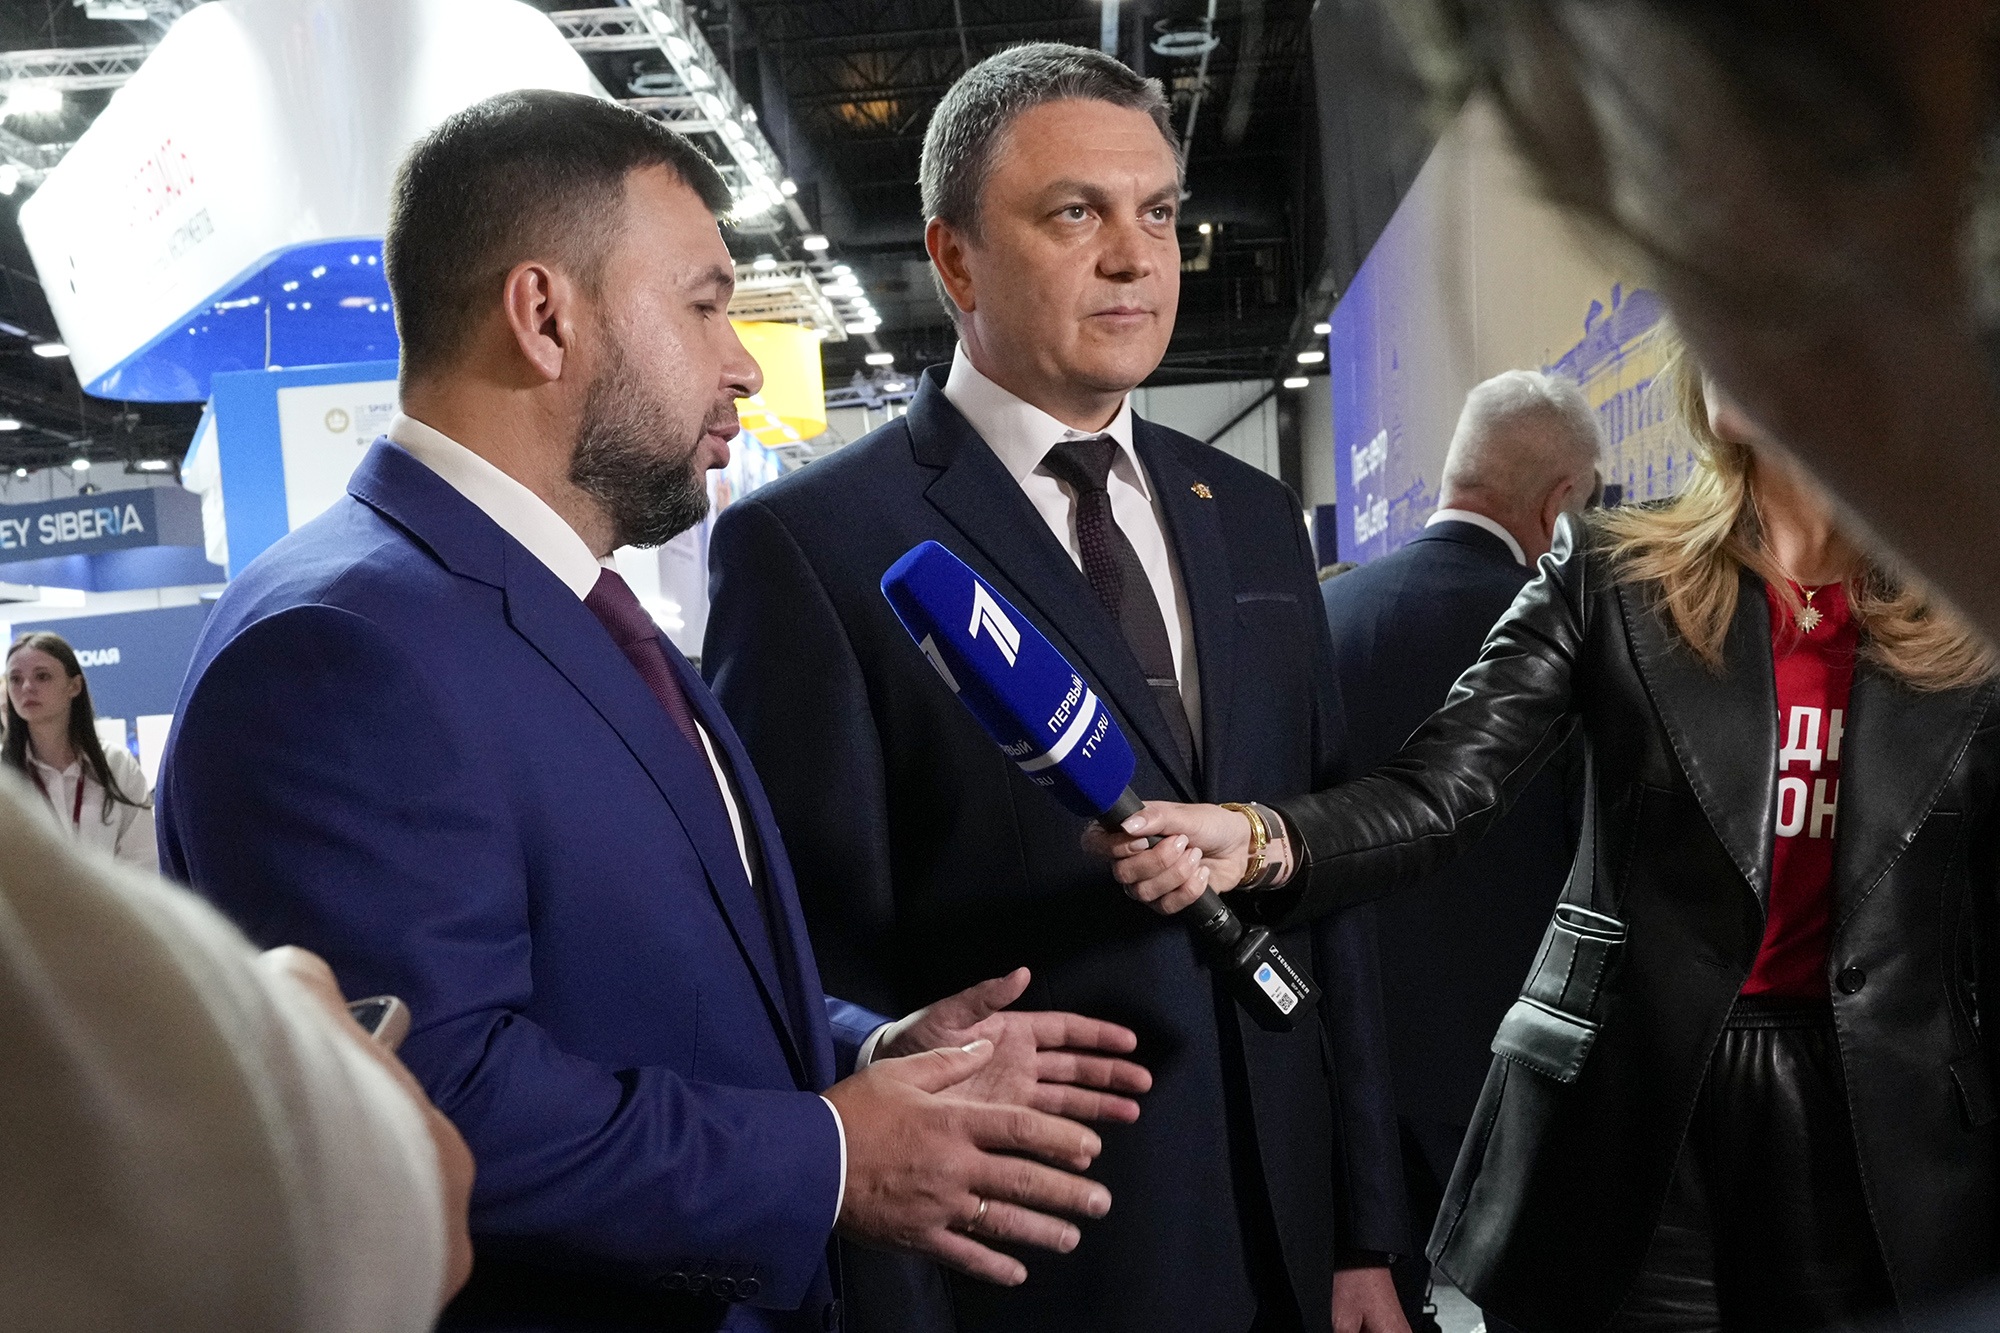 Denis Pushilin, leader of the Donetsk People's Republic, left, and Leonid Pasechnik, acting leader of self-proclaimed Luhansk People's Republic talk with journalists on the sidelines of the St. Petersburg International Economic Forum in St.Petersburg, Russia, on June 16.